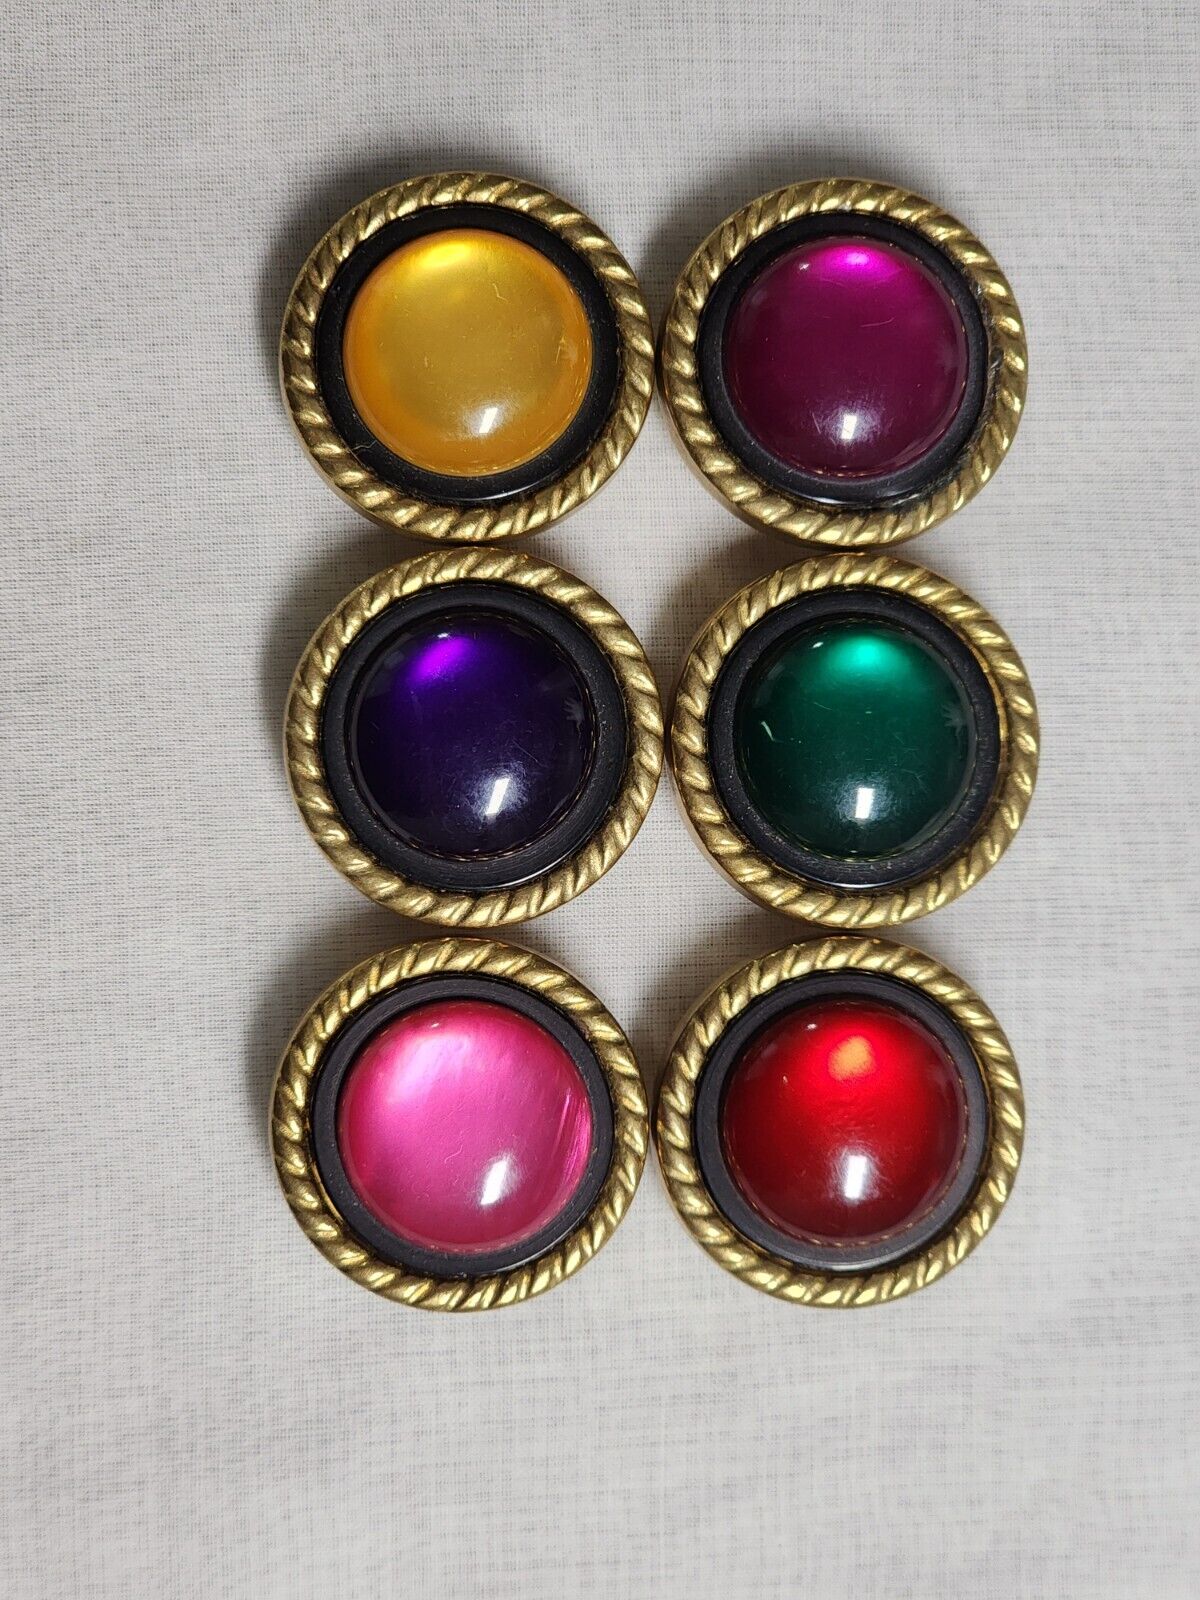 Vintage NONY New York Multi Color Round Dome Button Covers Set of 6 Moonglow